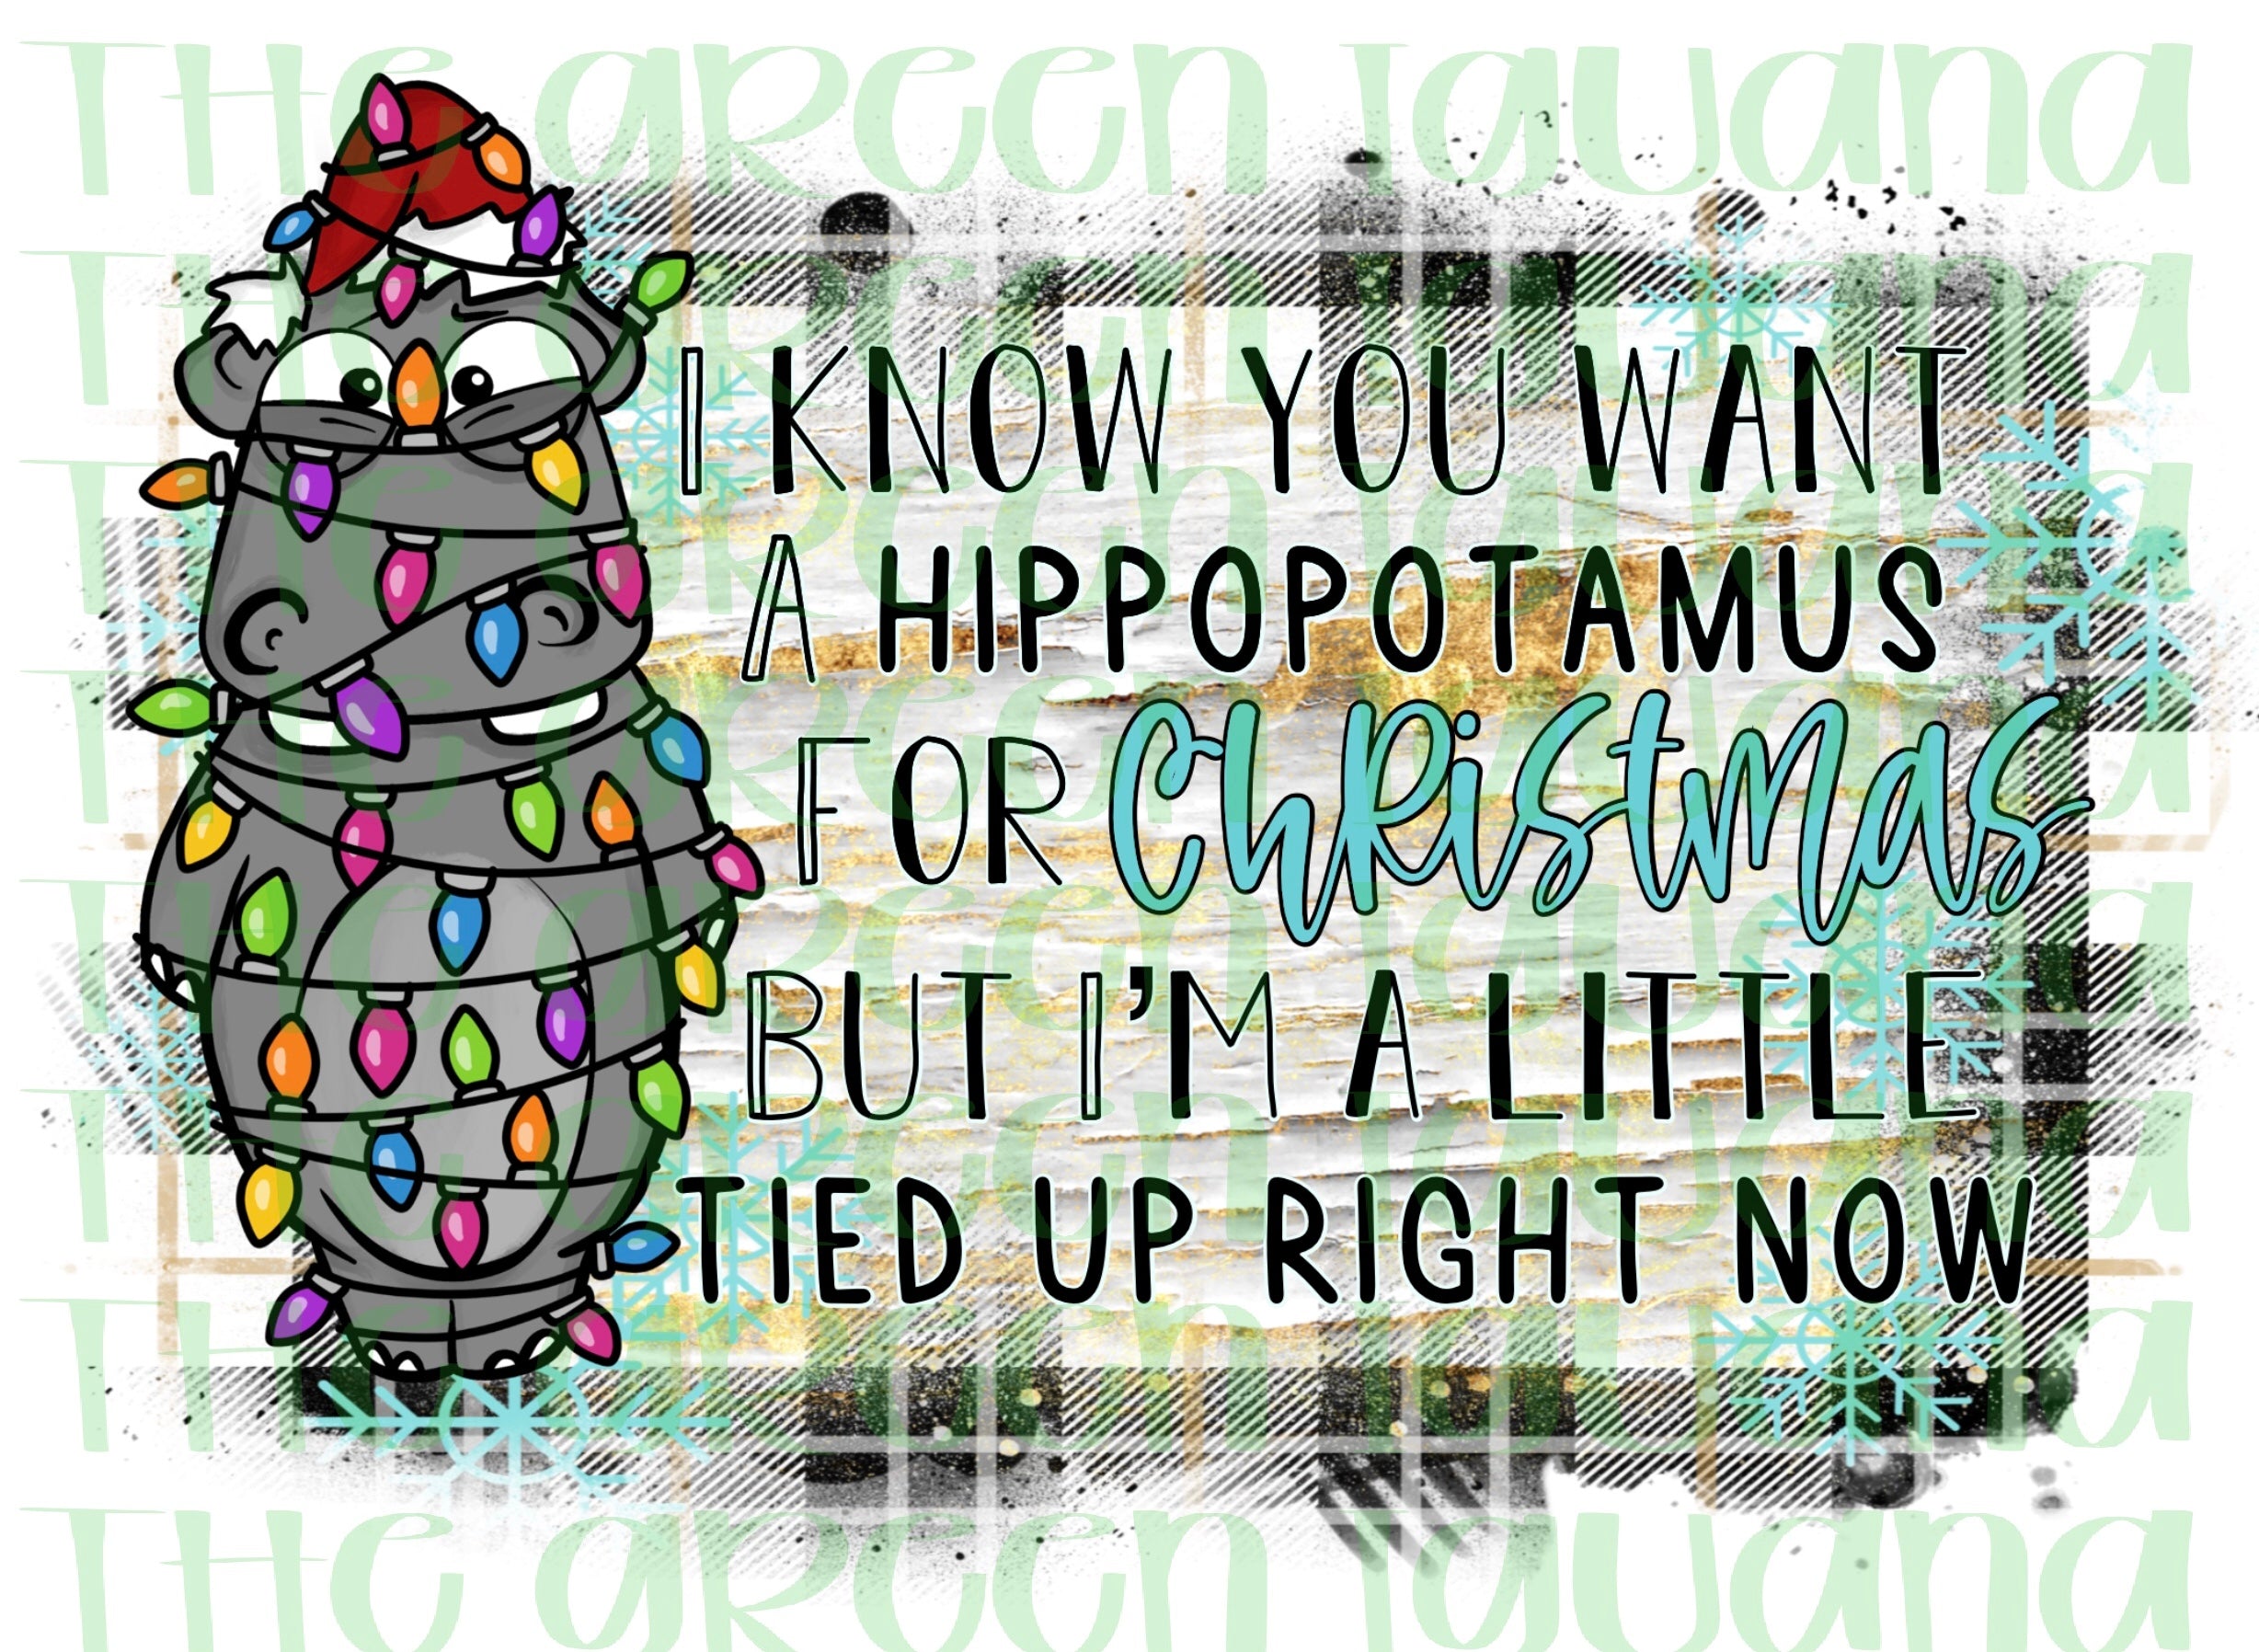 I know you want a hippopotamus for Christmas, but I’m a little tied up right now - DIGITAL